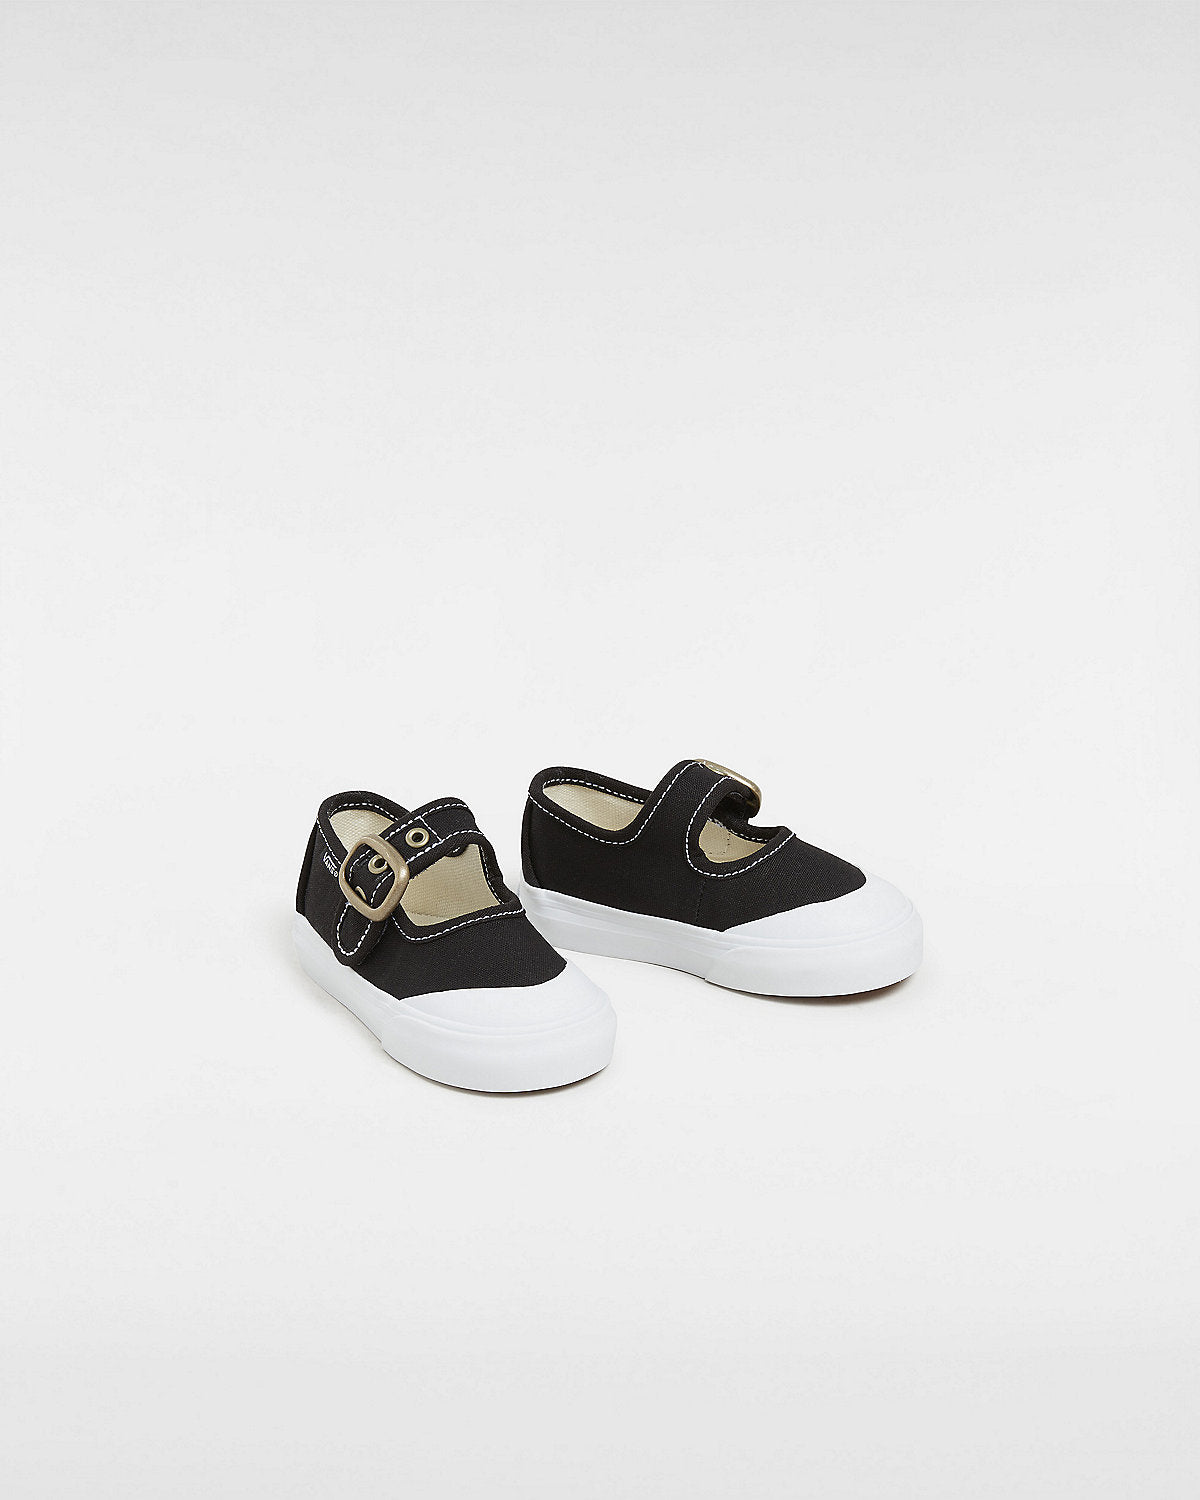 VANS Toddler Mary Jane Trainers - Black